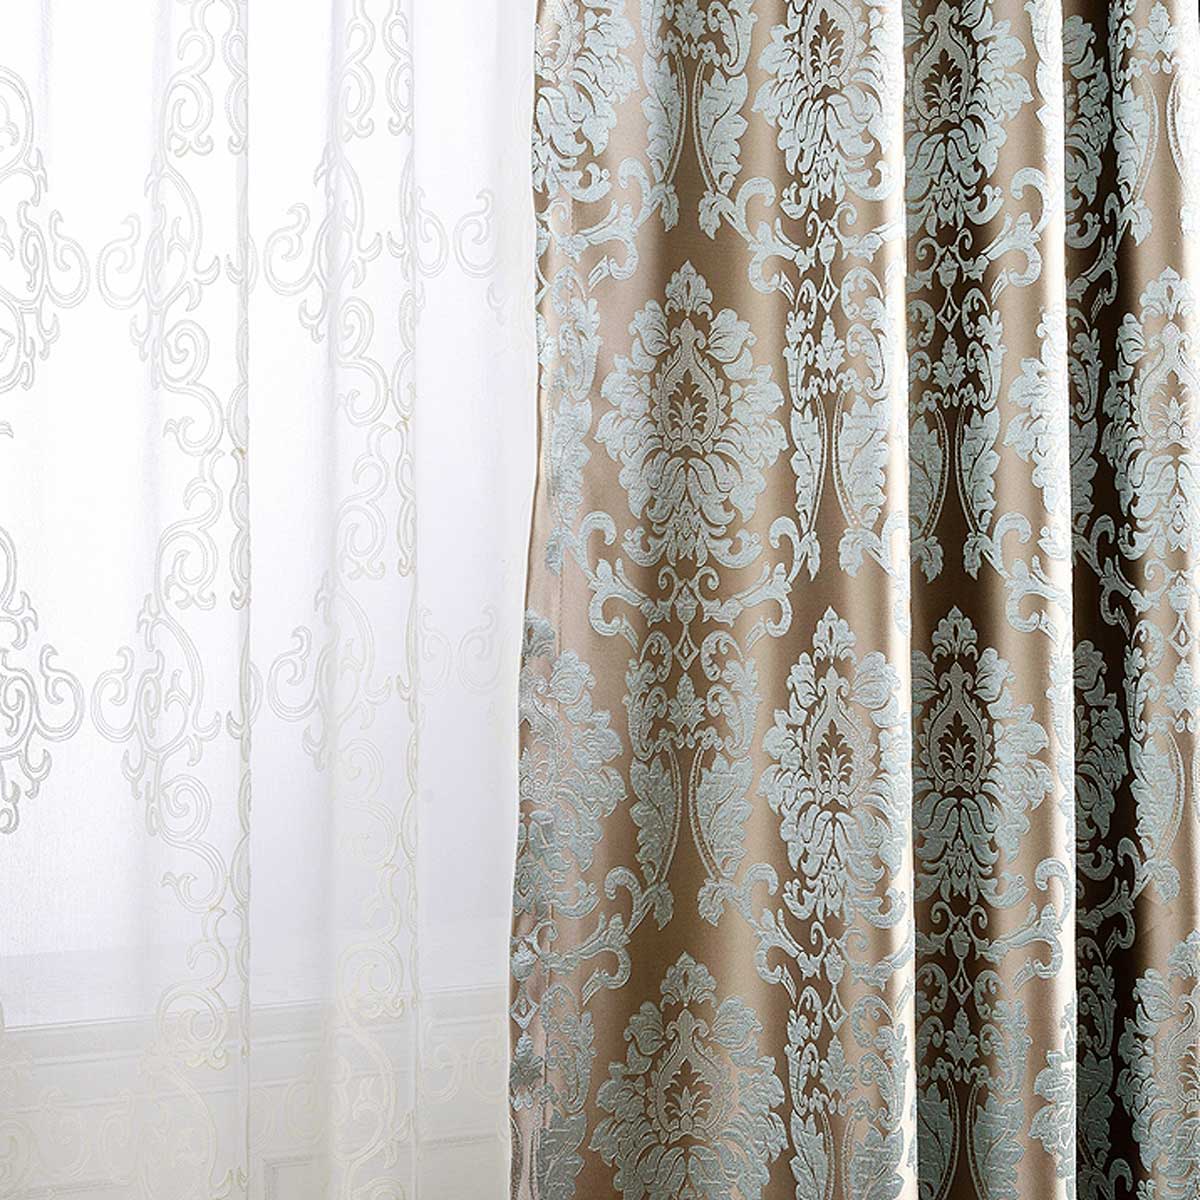 How to Layer Curtains with Sheers?